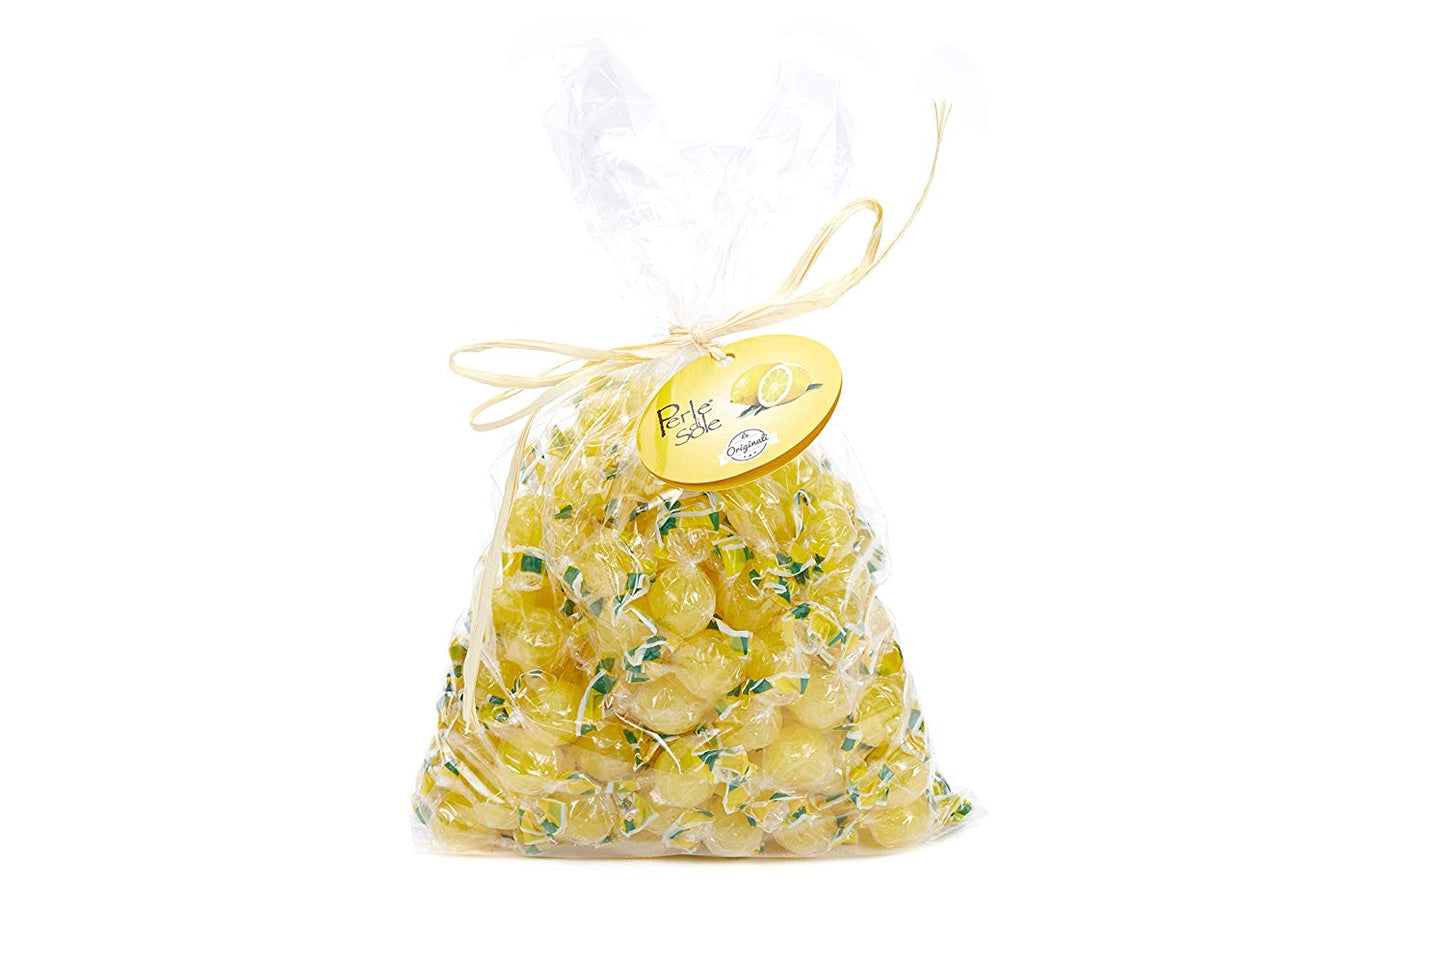 Lemon Drops made with Essential Oils of Lemons from the Amalfi Coast